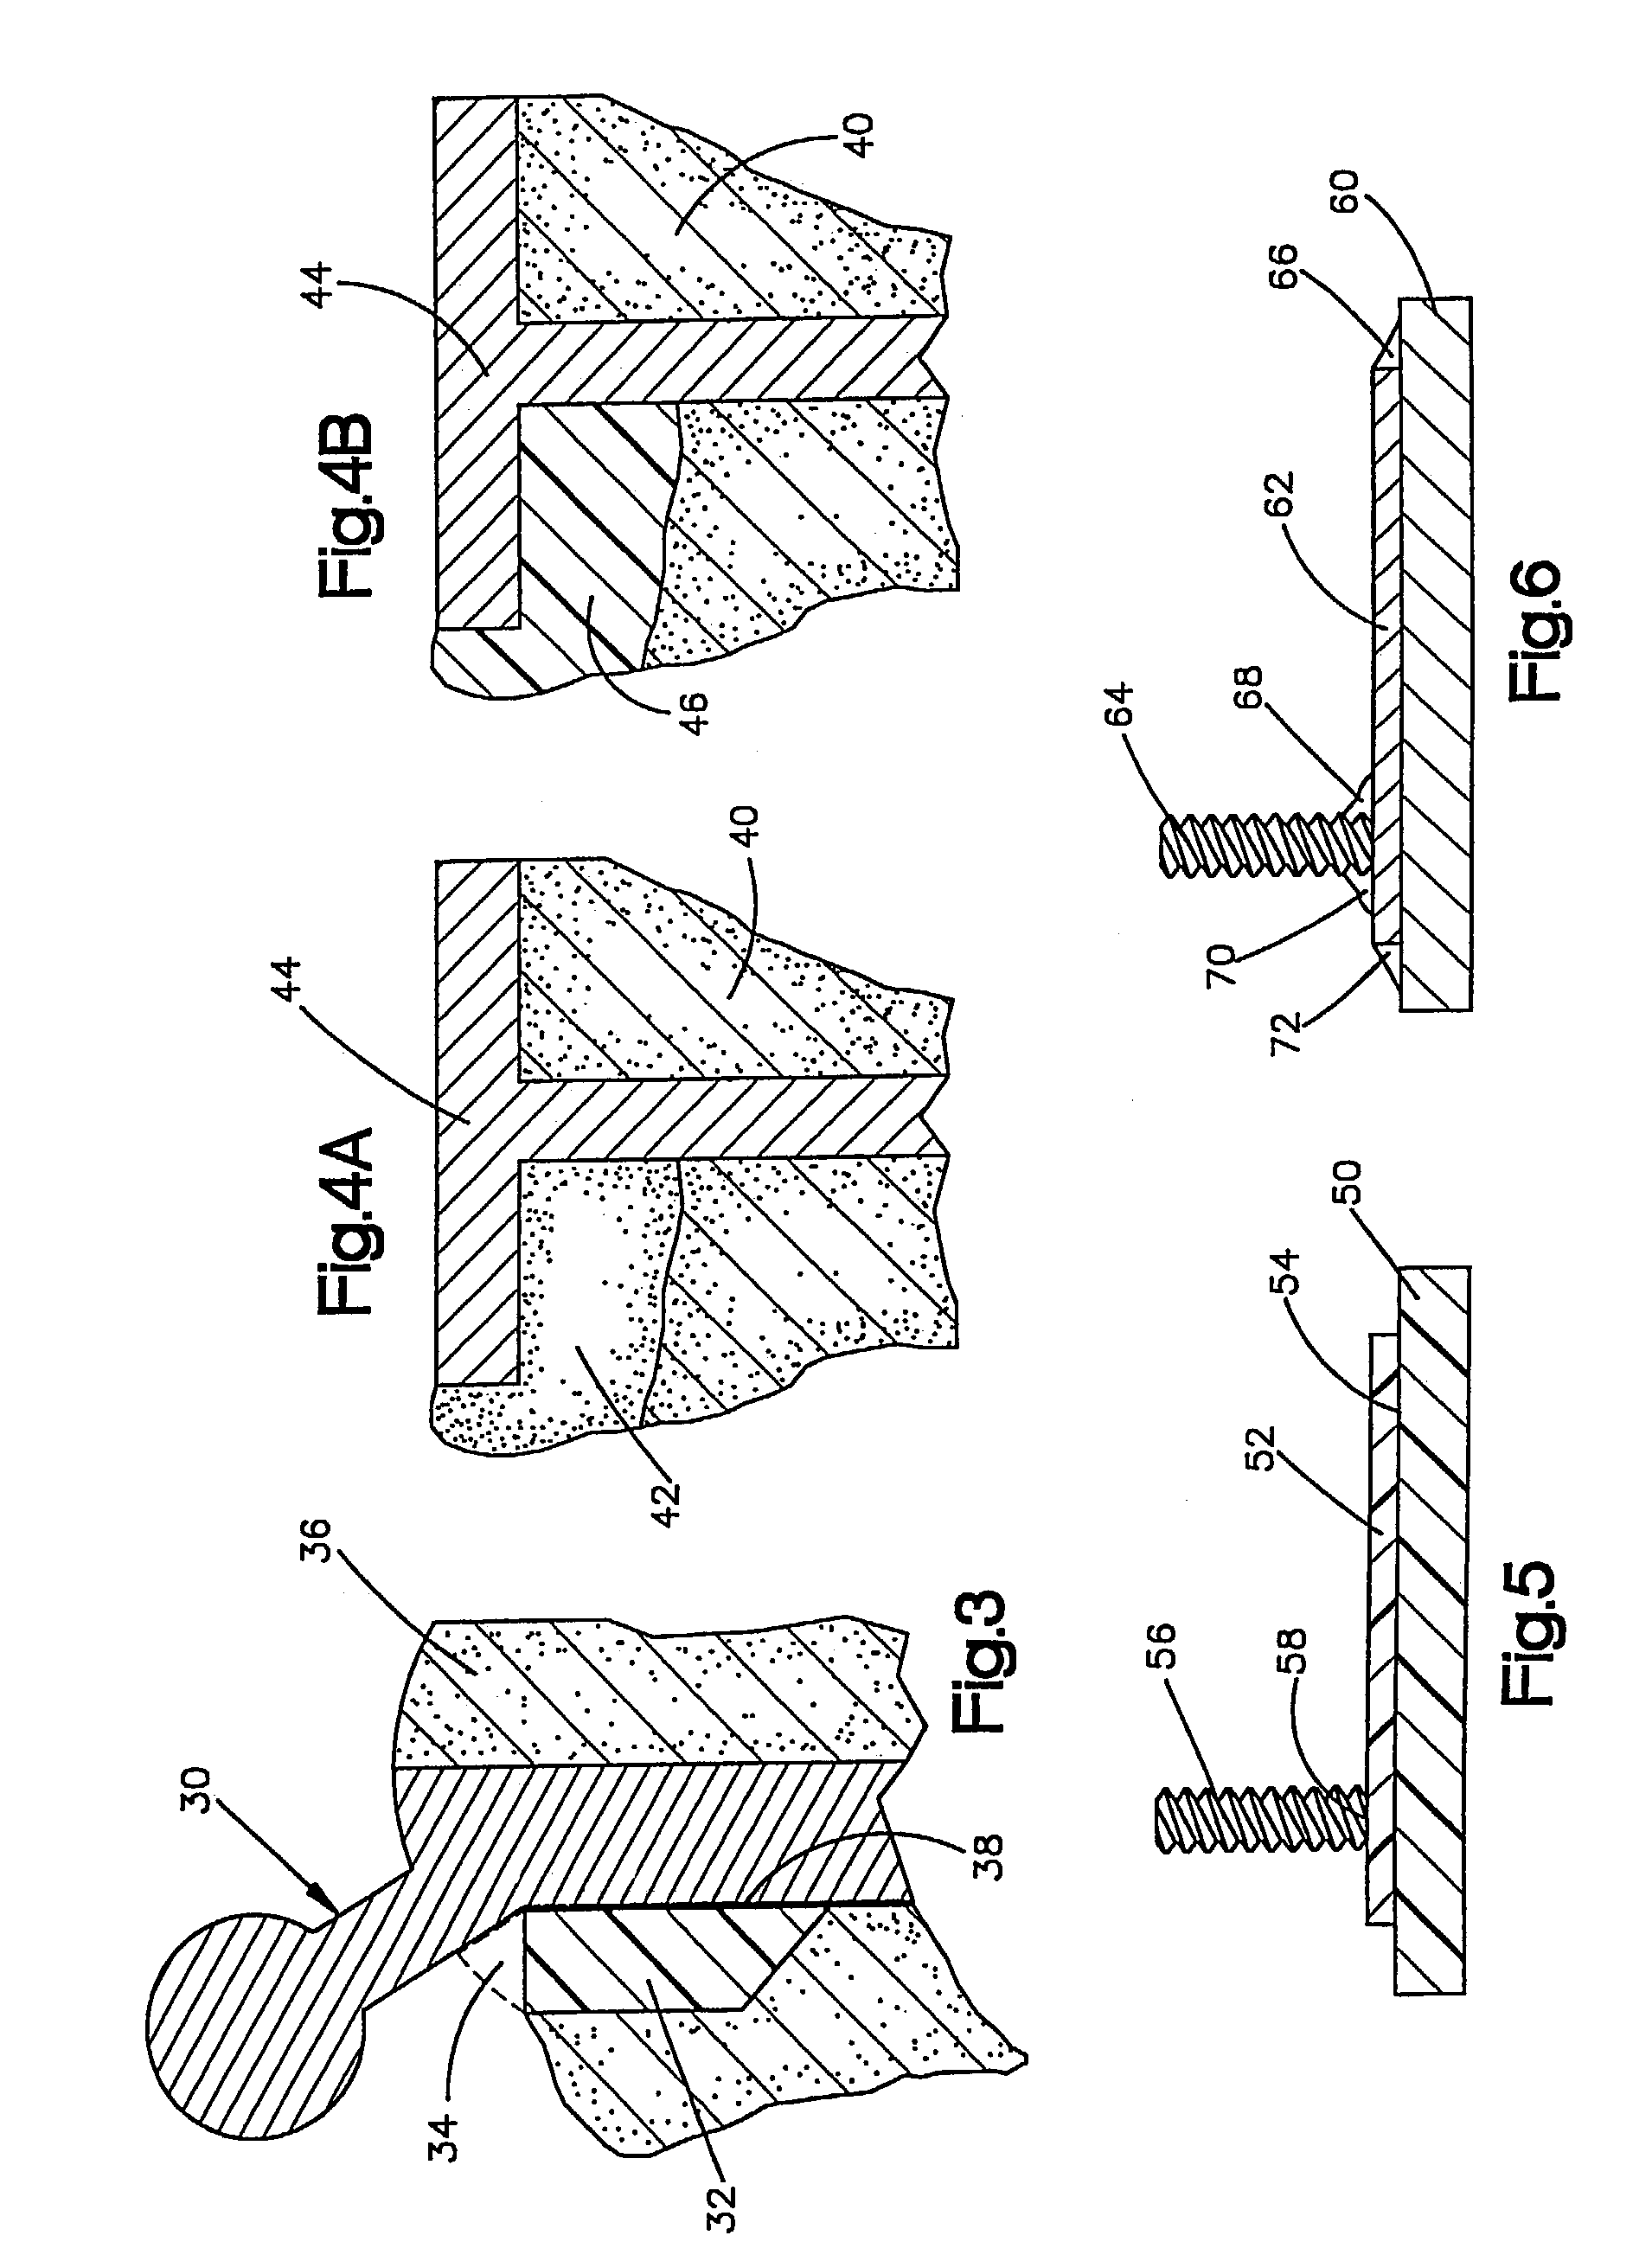 Composite surgical devices